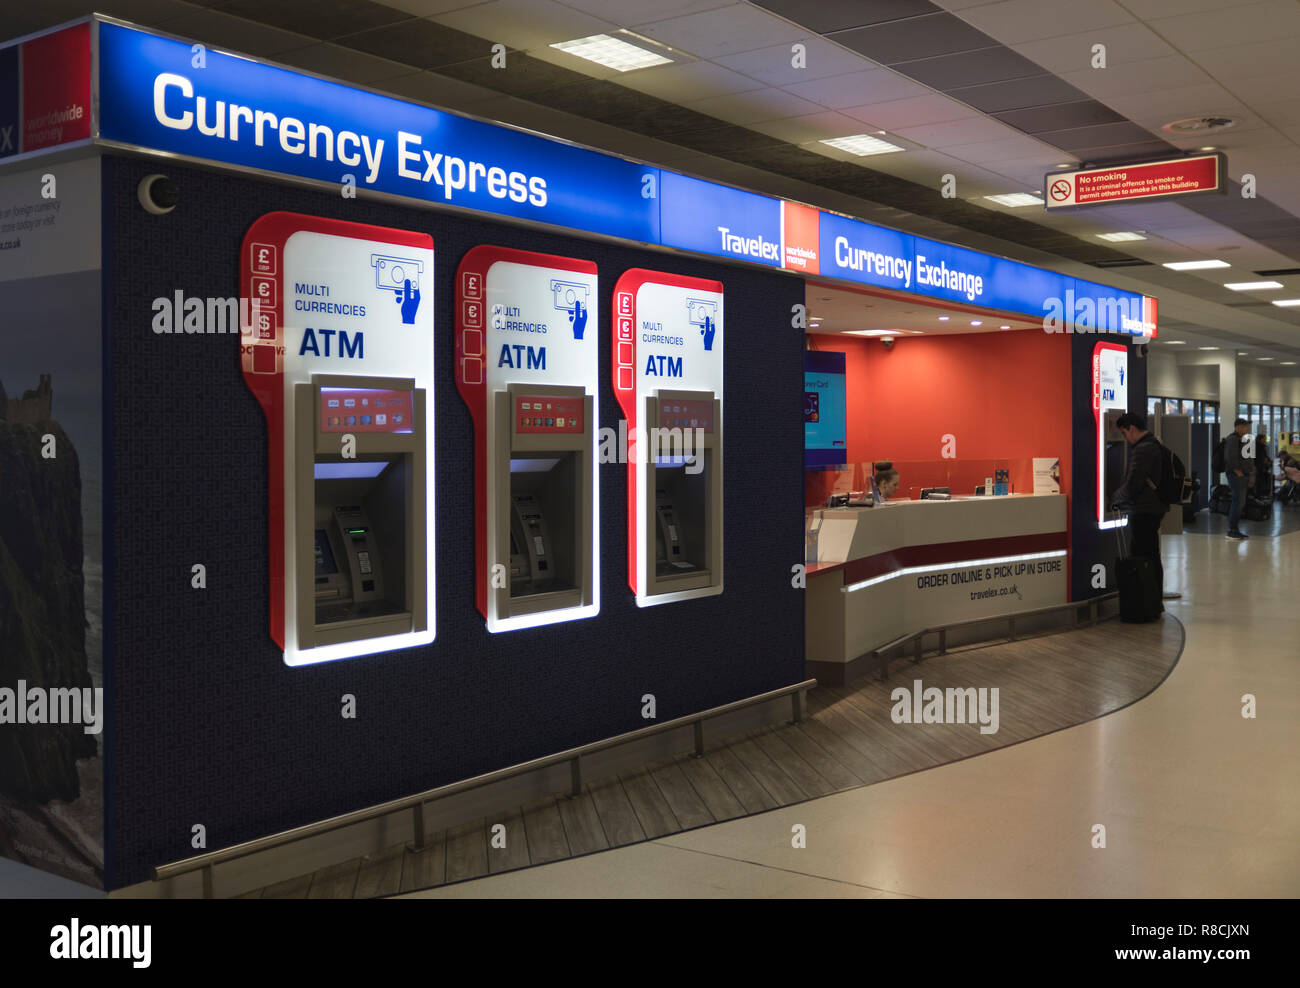 dh Aberdeen International Airport CURRENCY EXCHANGE UK Foreign ATM machine multi currencies cash machines Scotland Stock Photo